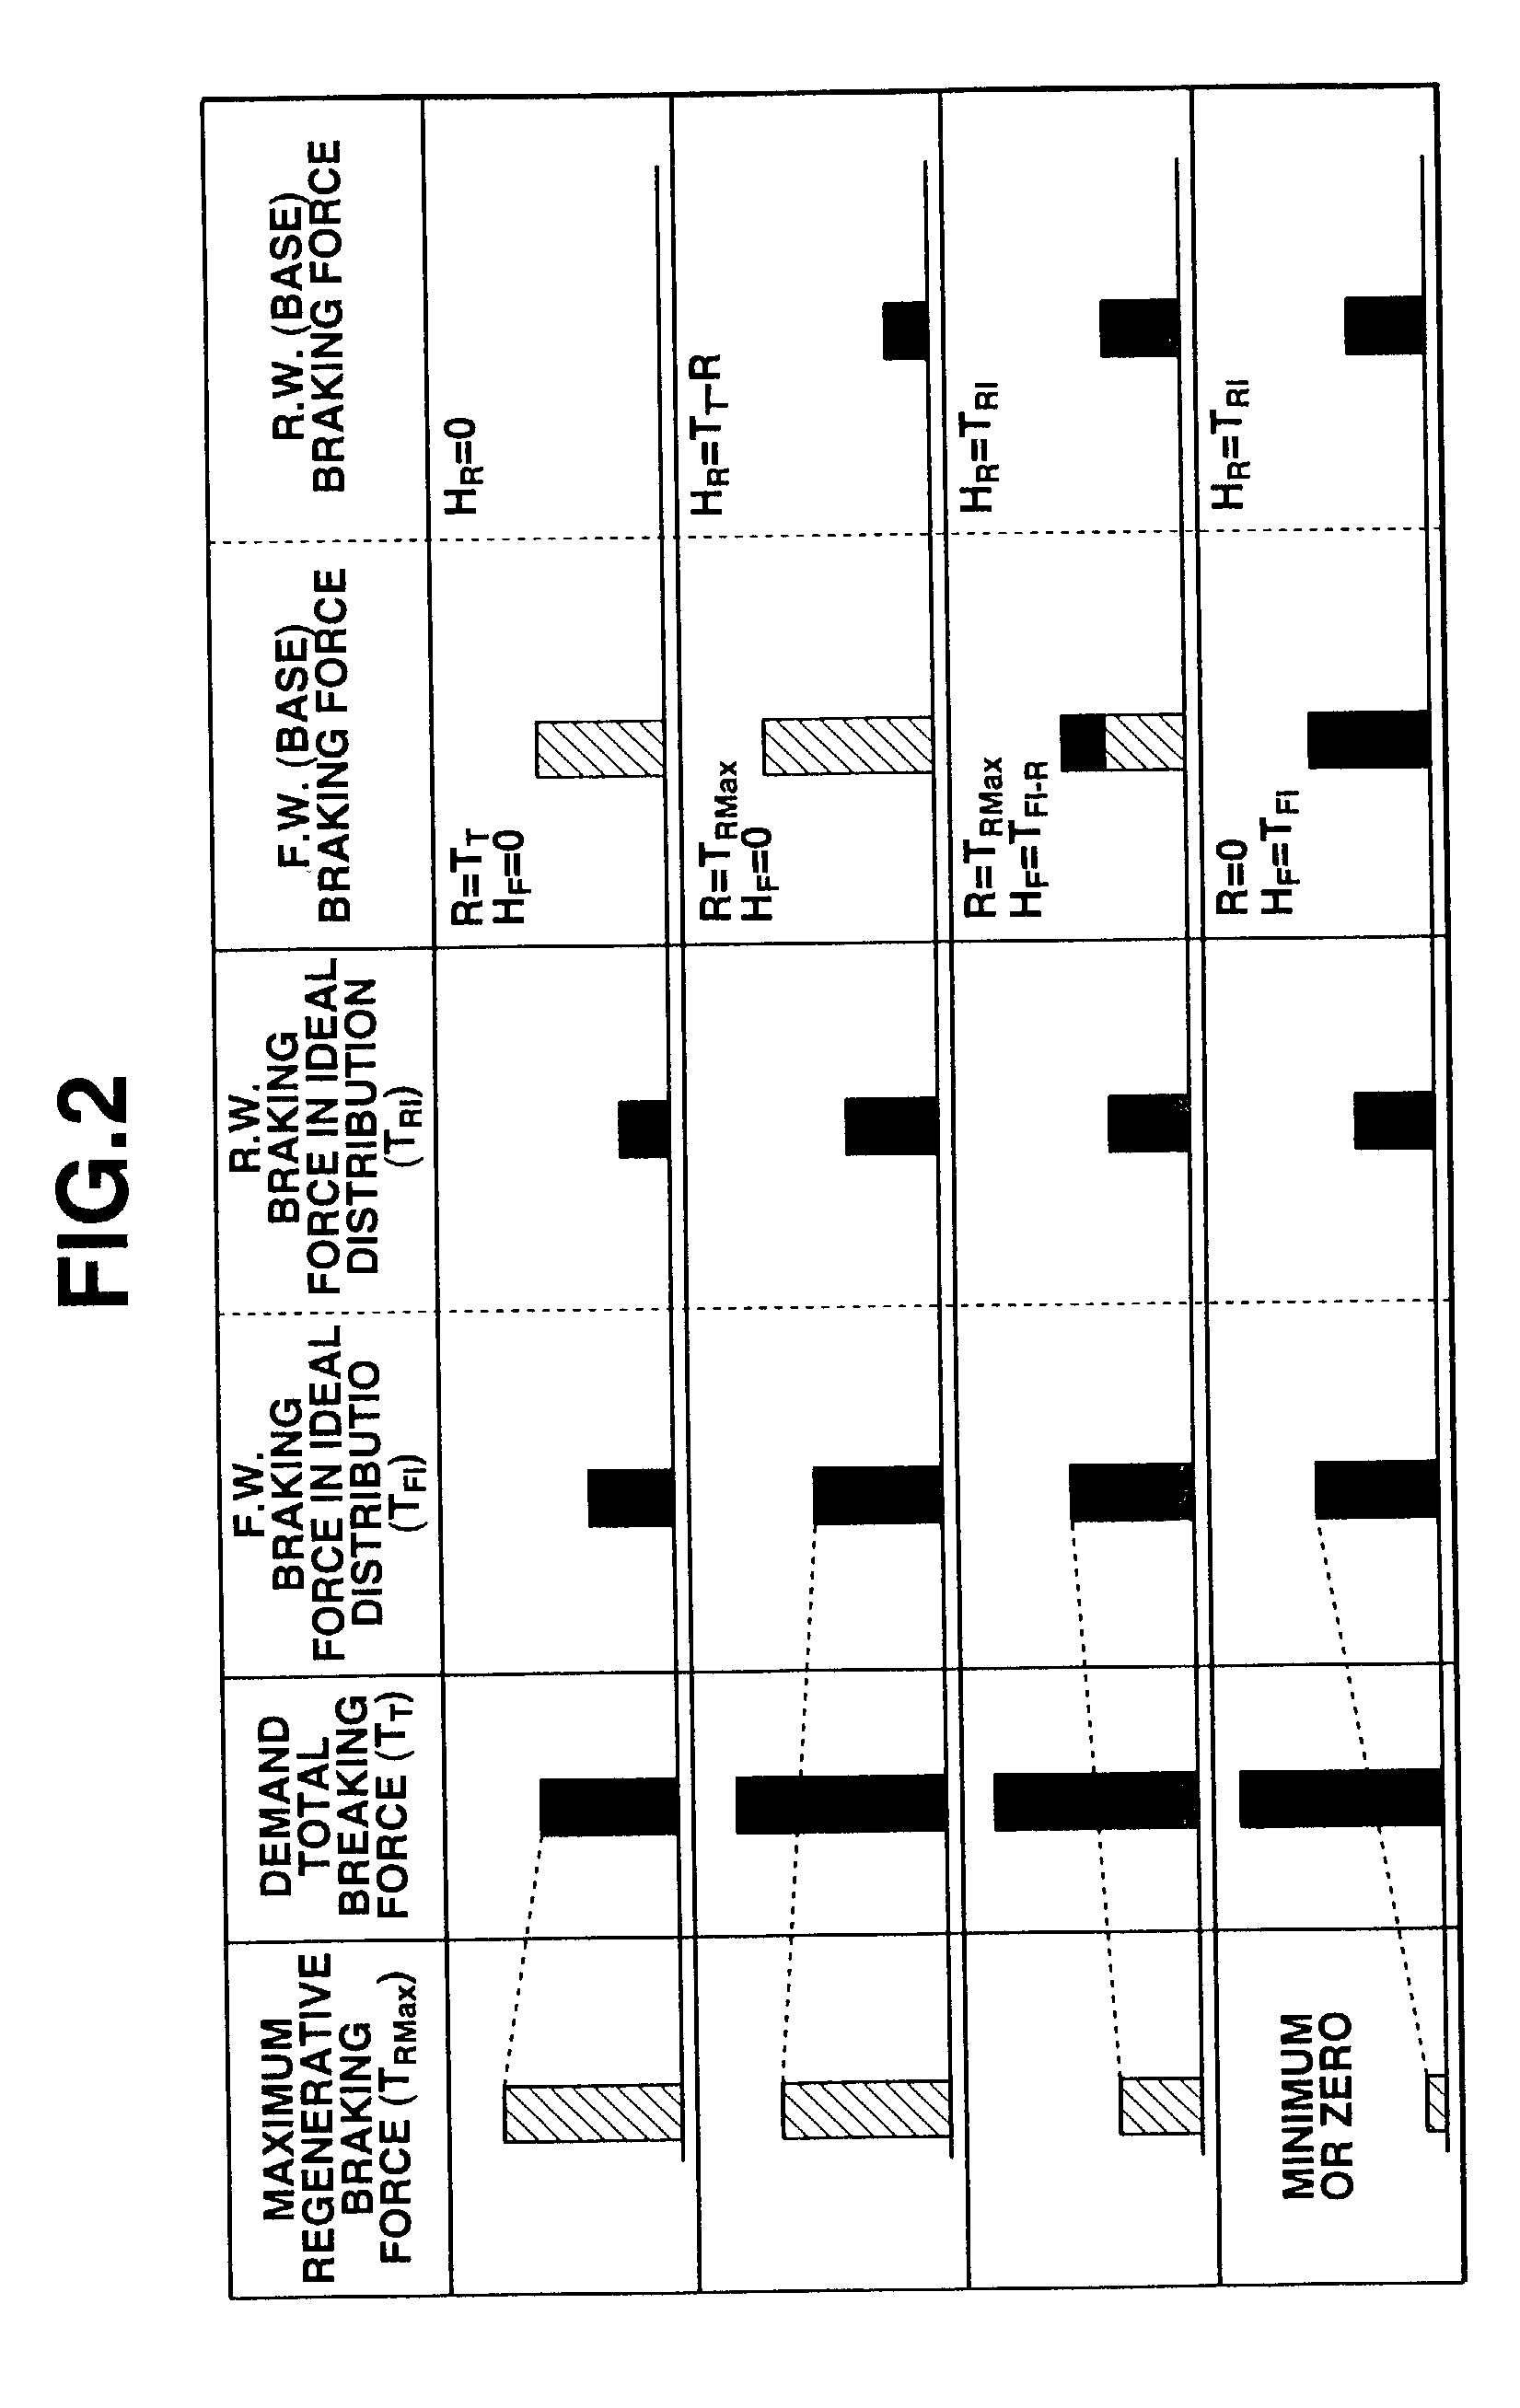 Brake control for vehicle